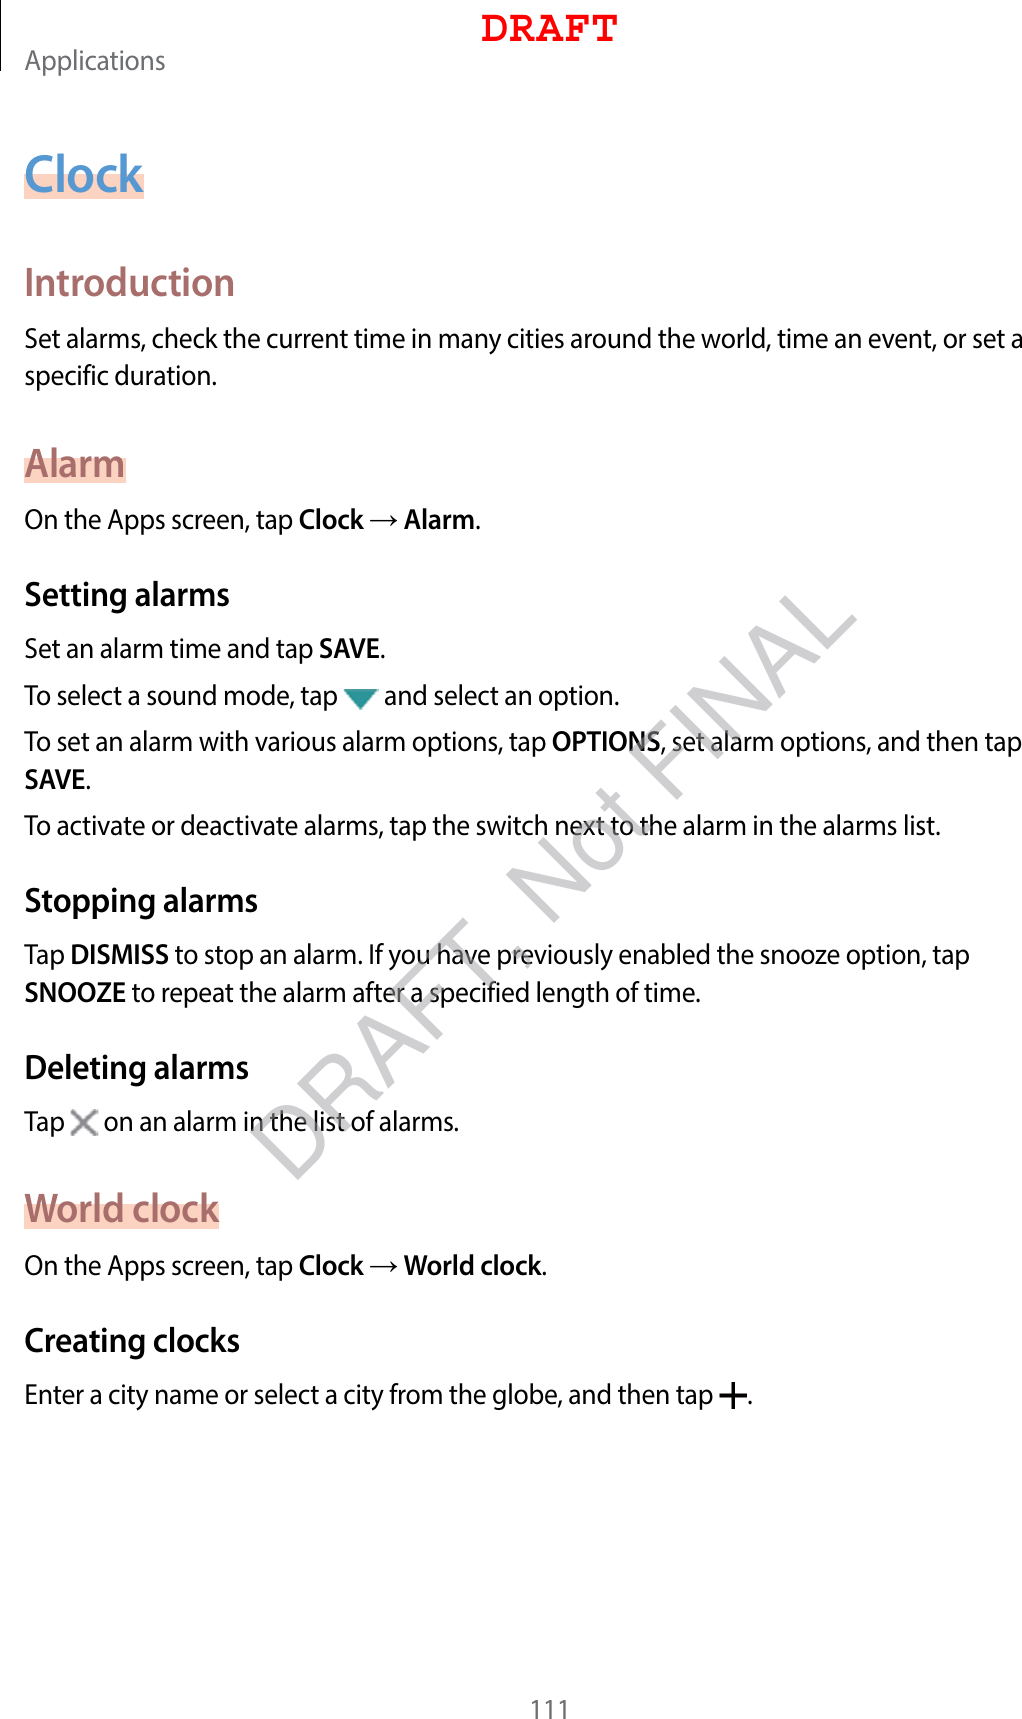 Applications111ClockIntroductionSet alarms, check the current time in many cities around the world, time an event, or set a specific duration.AlarmOn the Apps screen, tap Clock  Alarm.Setting alarmsSet an alarm time and tap SAVE.To select a sound mode, tap   and select an option.To set an alarm with various alarm options, tap OPTIONS, set alarm options, and then tap SAVE.To activate or deactivate alarms, tap the switch next to the alarm in the alarms list.Stopping alarmsTap DISMISS to stop an alarm. If you have previously enabled the snooze option, tap SNOOZE to repeat the alarm after a specified length of time.Deleting alarmsTap   on an alarm in the list of alarms.World clockOn the Apps screen, tap Clock  World clock.Creating clocksEnter a city name or select a city from the globe, and then tap  .DRAFTDRAFT, Not FINAL